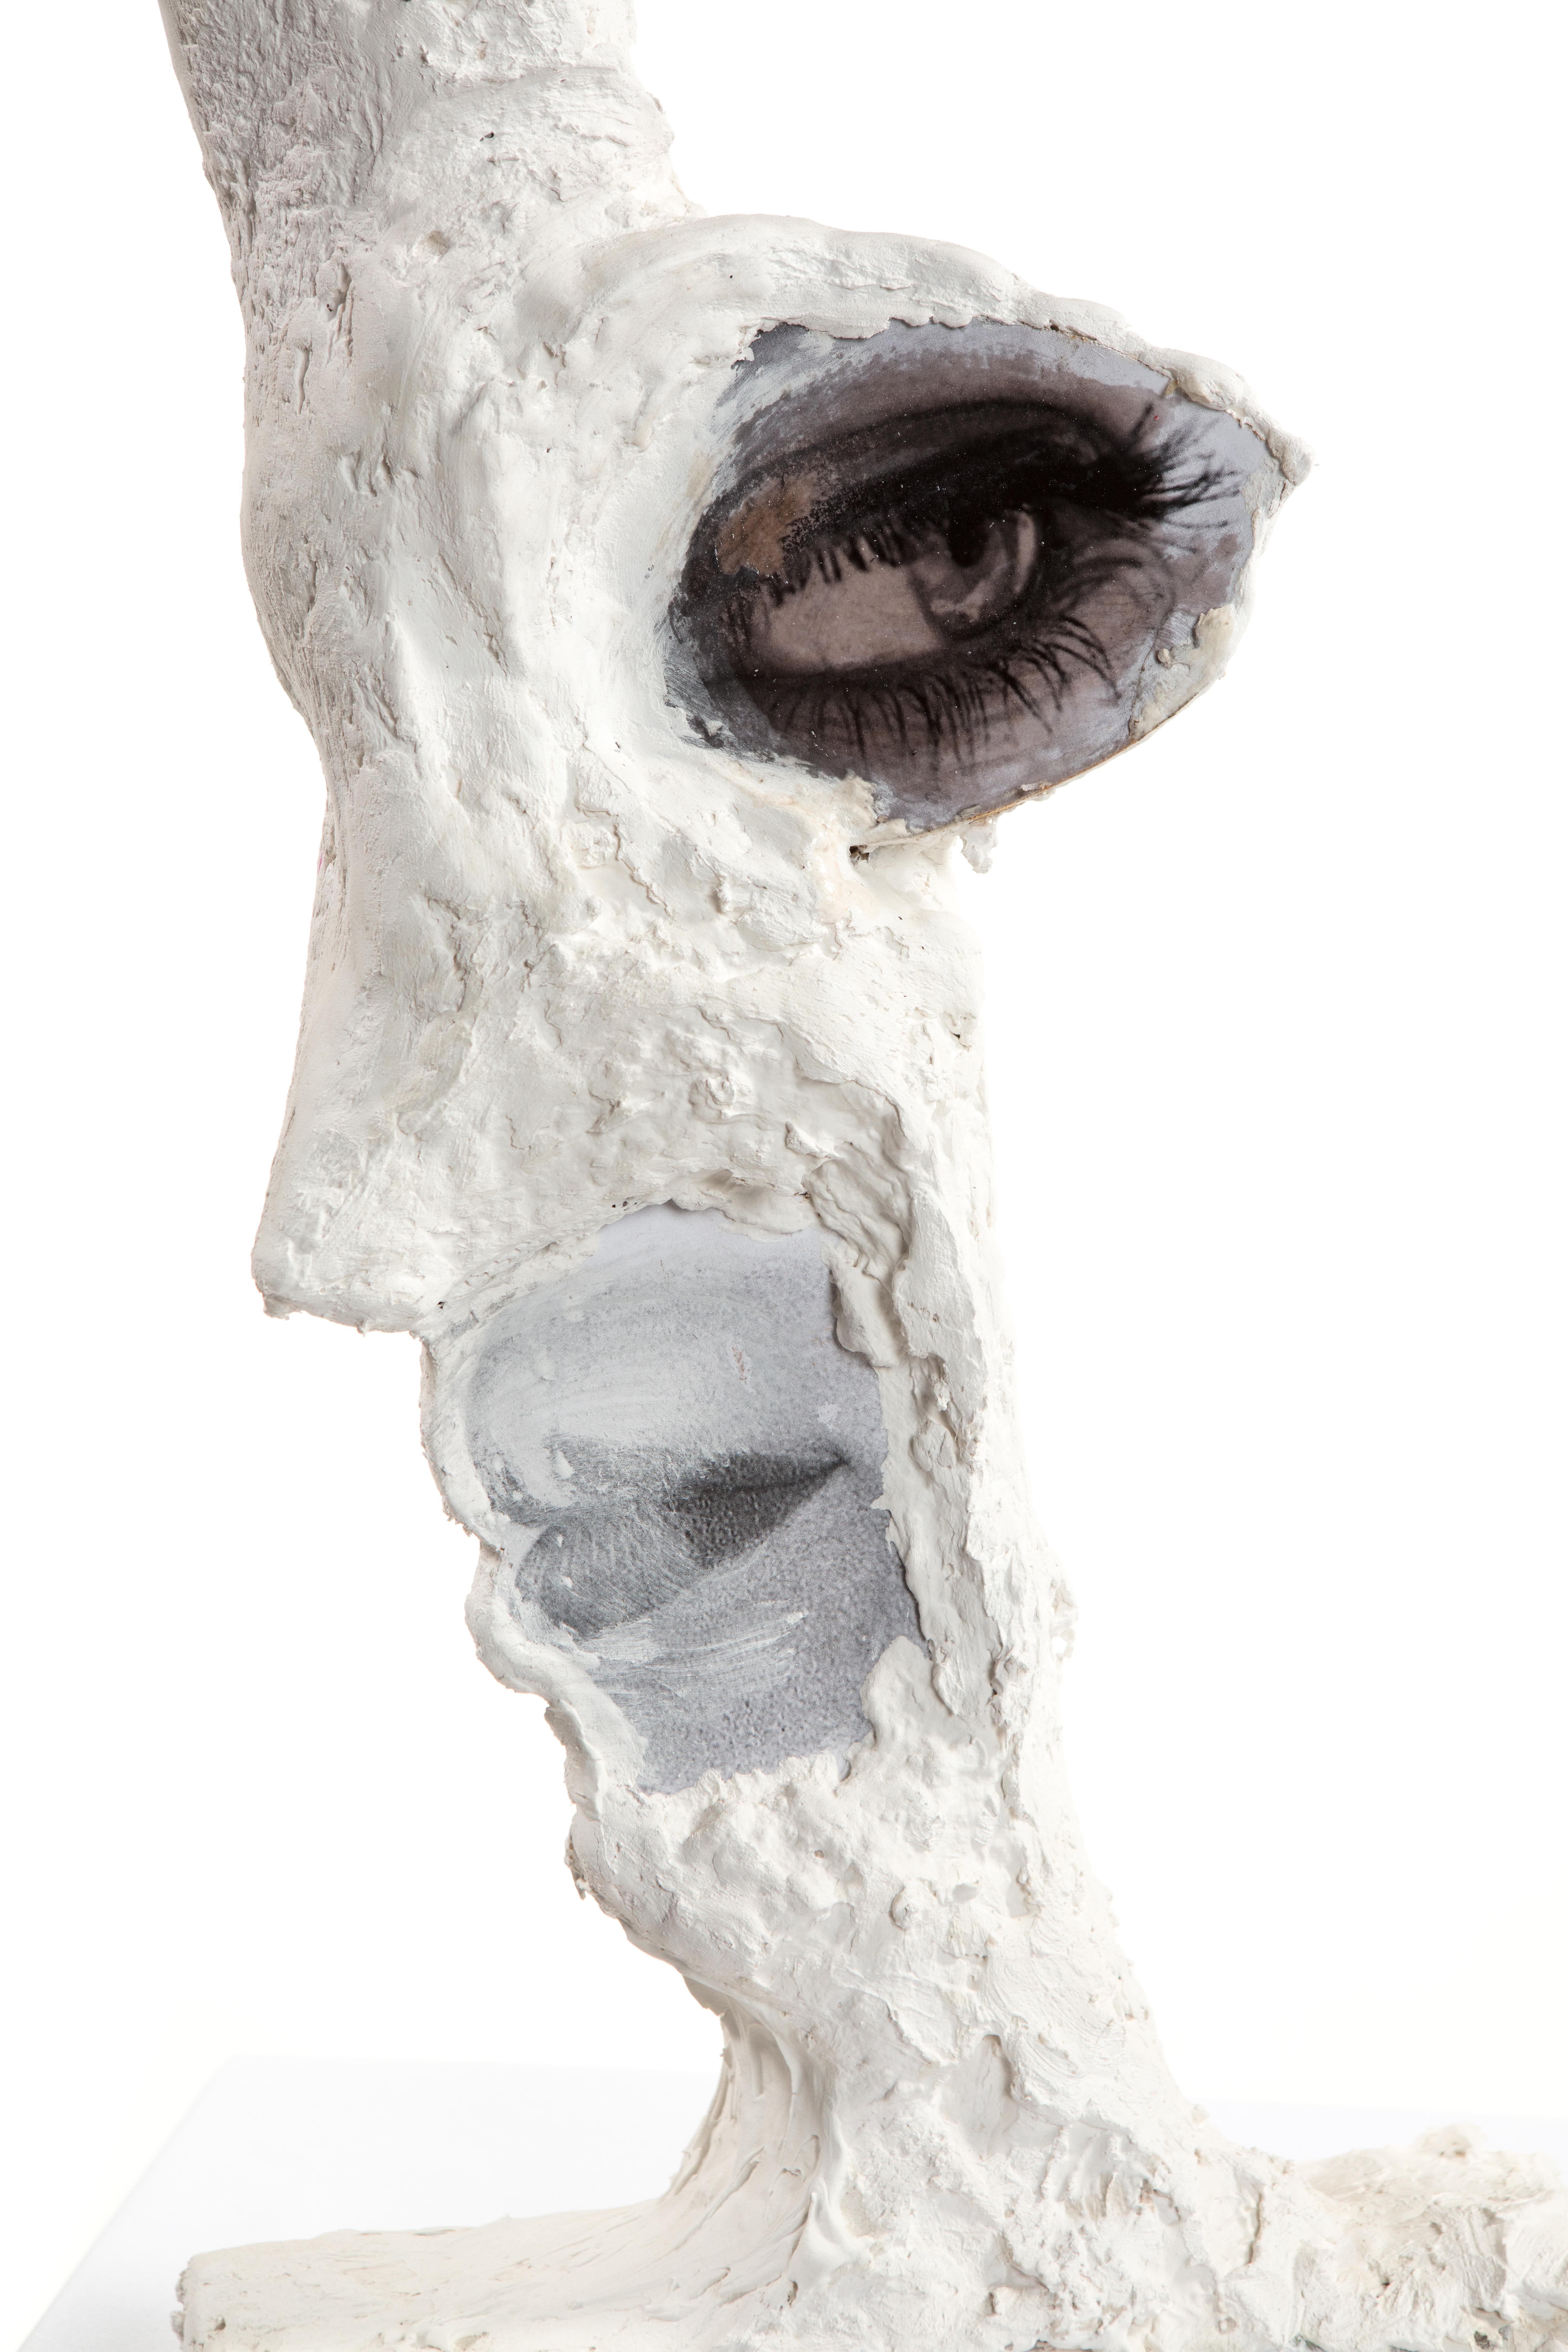 This is a new work by Mattia Biagi
Sculptural plaster figure, plaster+ paper, and image collage on wood.